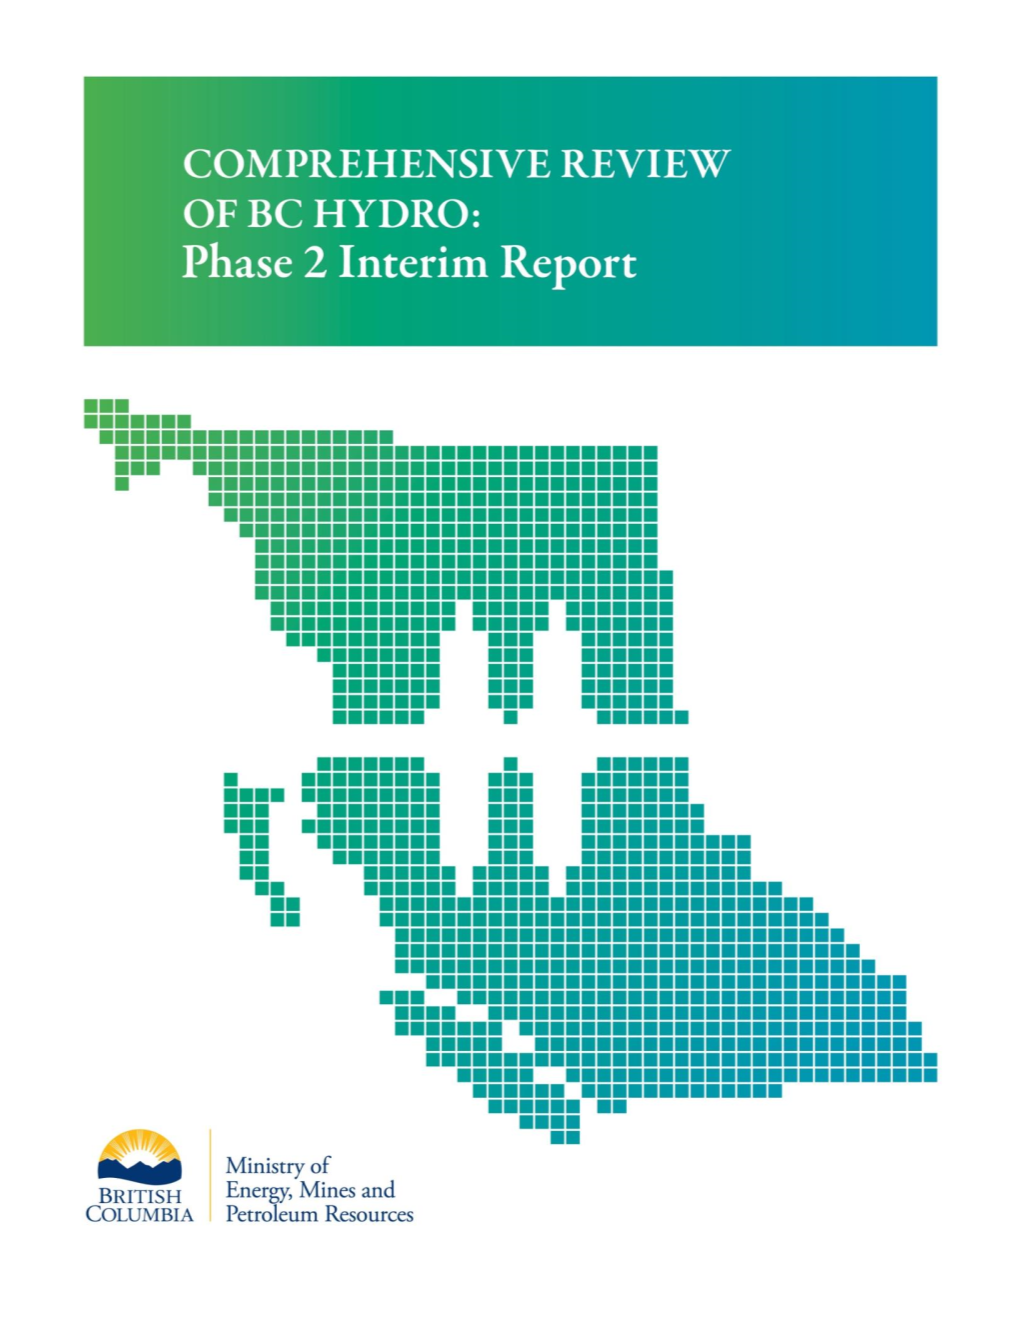 COMPREHENSIVE REVIEW of BC HYDRO: Phase 2 Interim Report